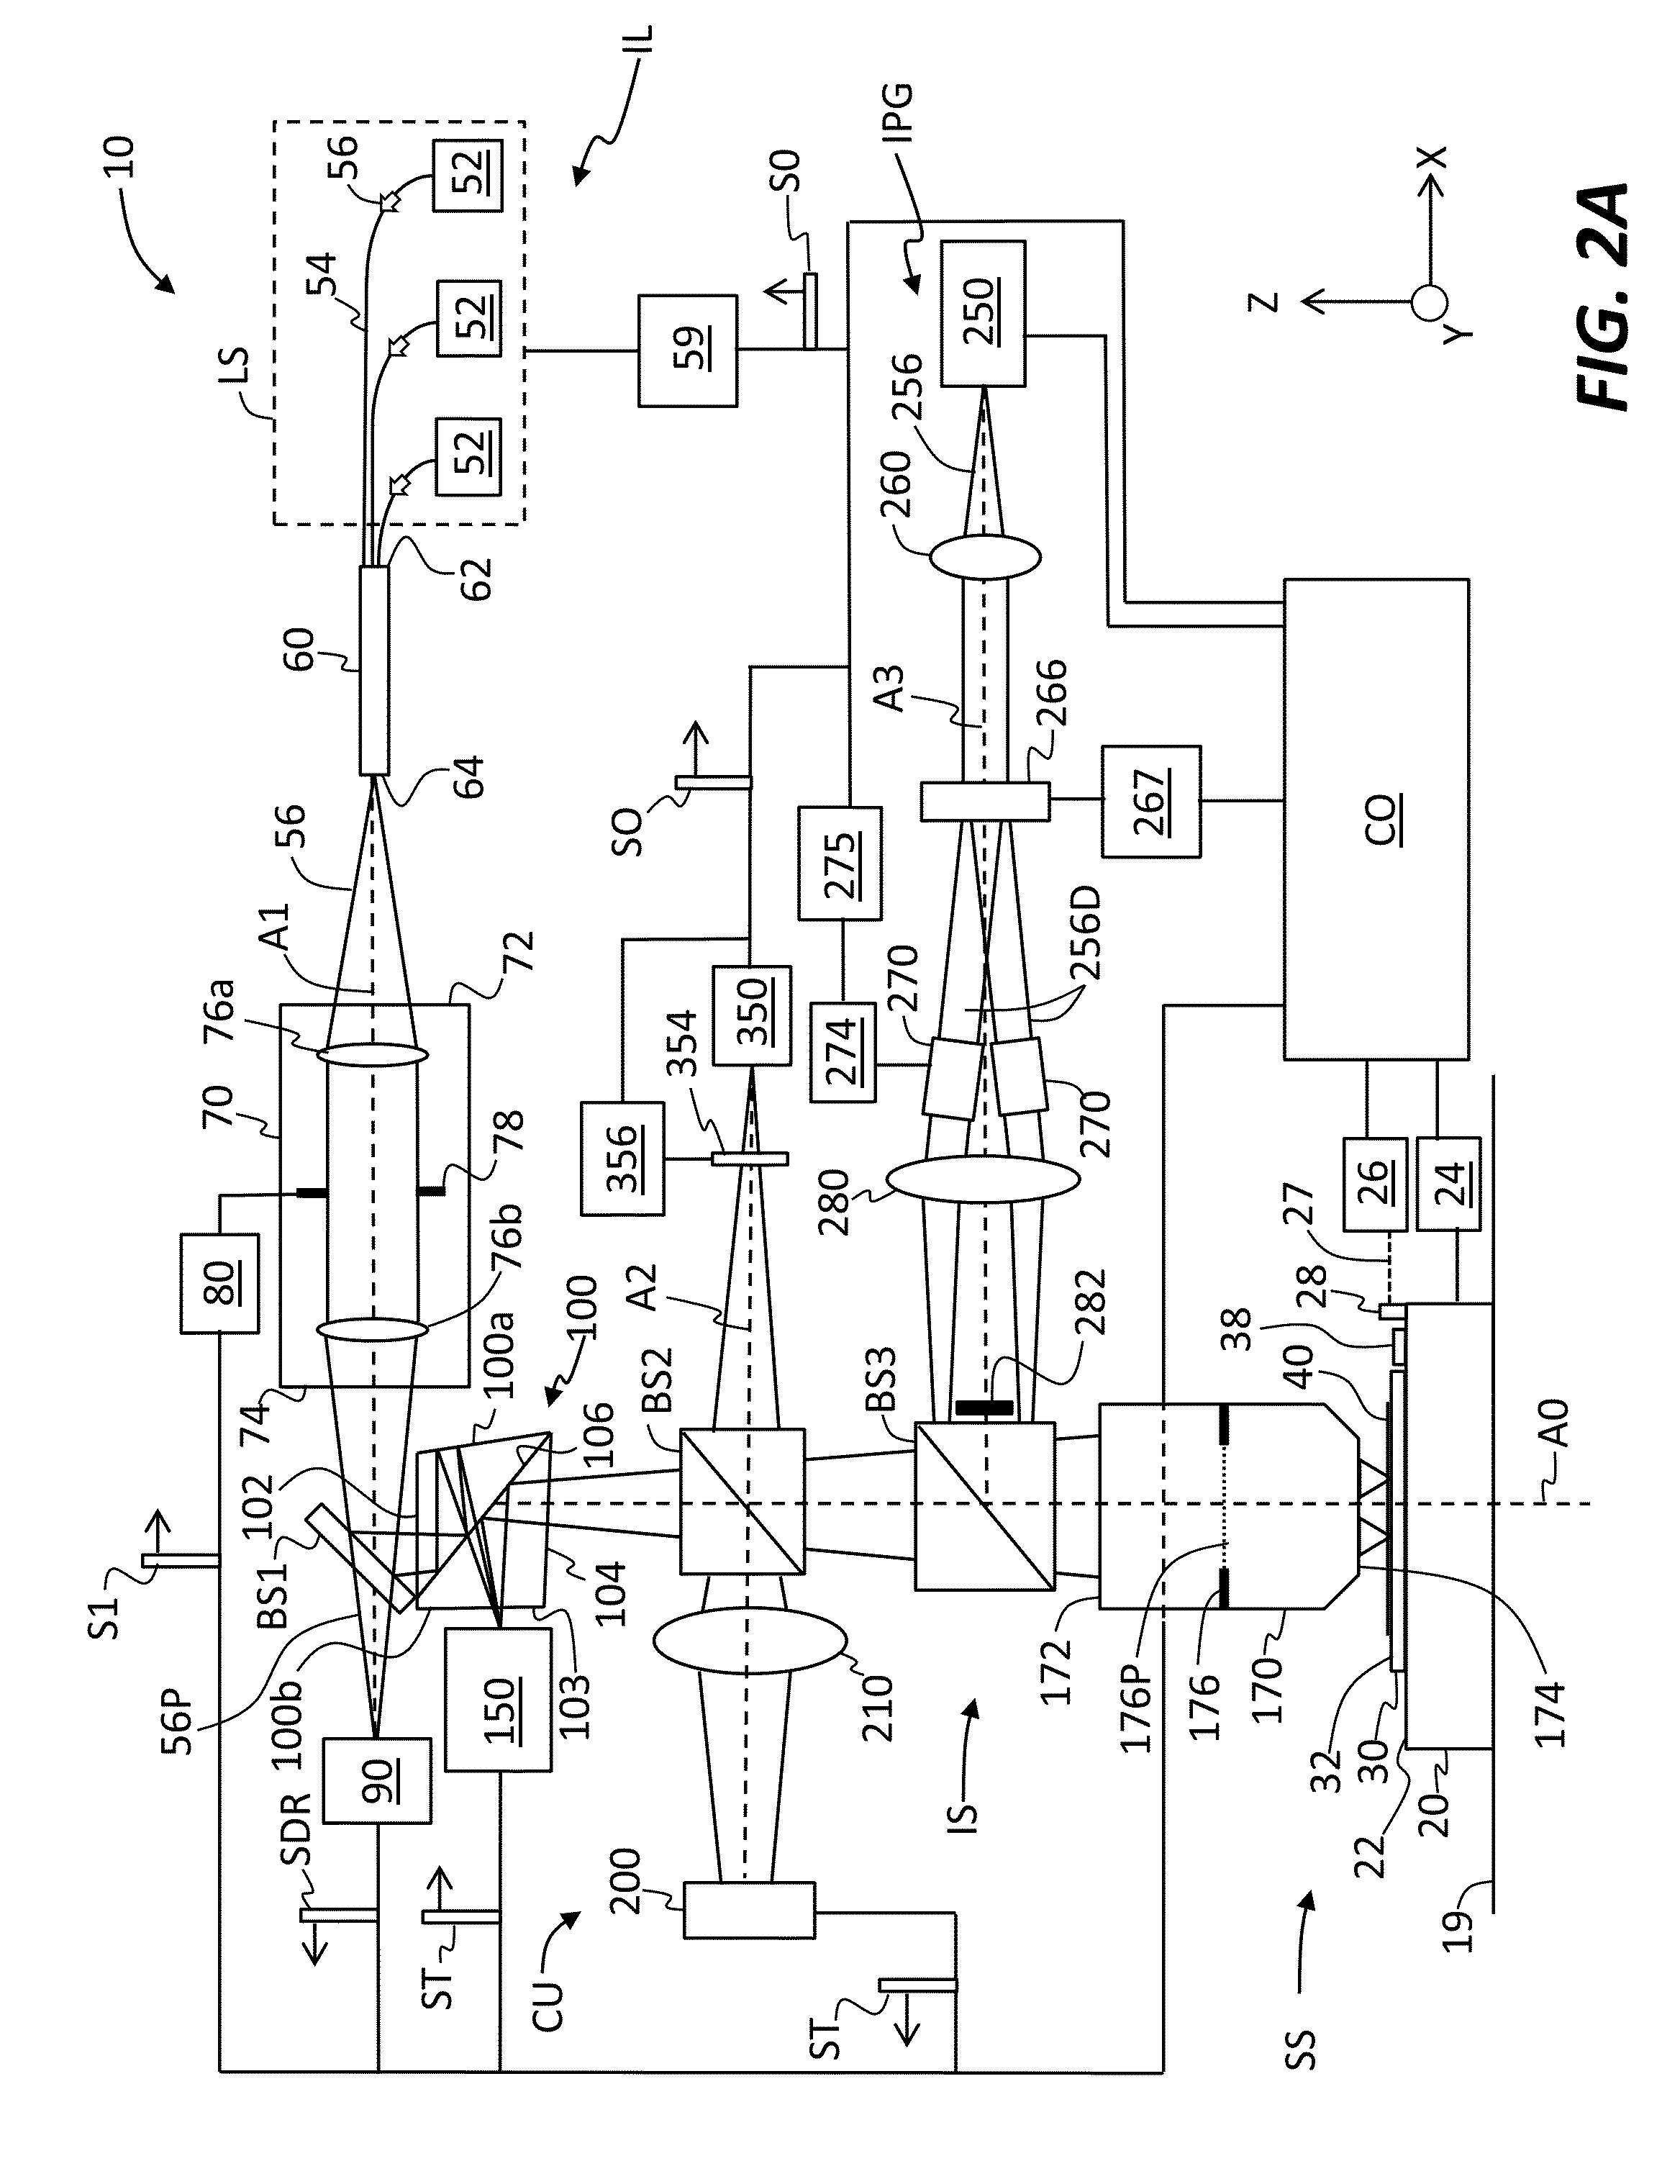 Apparatus and method of direct writing with photons beyond the diffraction limit